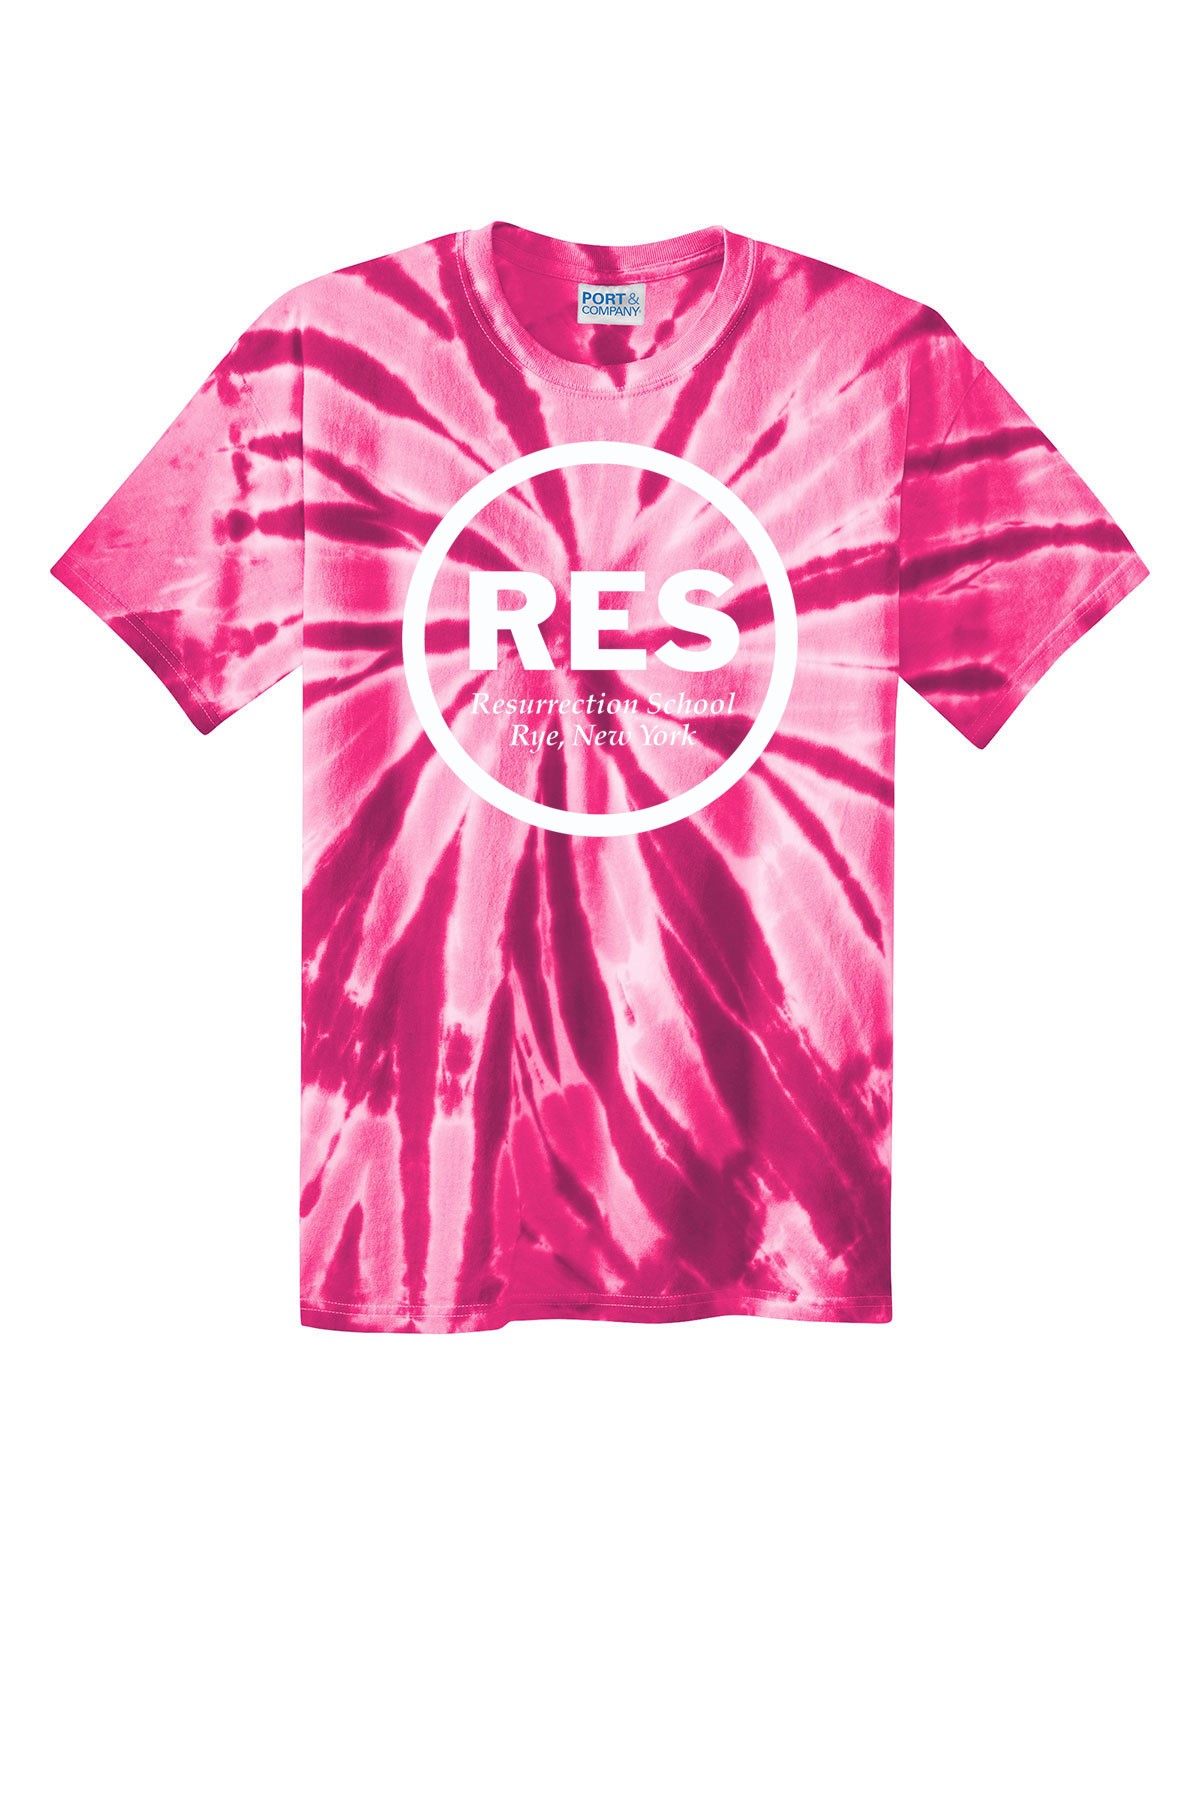 Resurrection Spirit S/S Tie Dye T-Shirt w/ White Logo - Please Allow 2-3 Weeks for Delivery